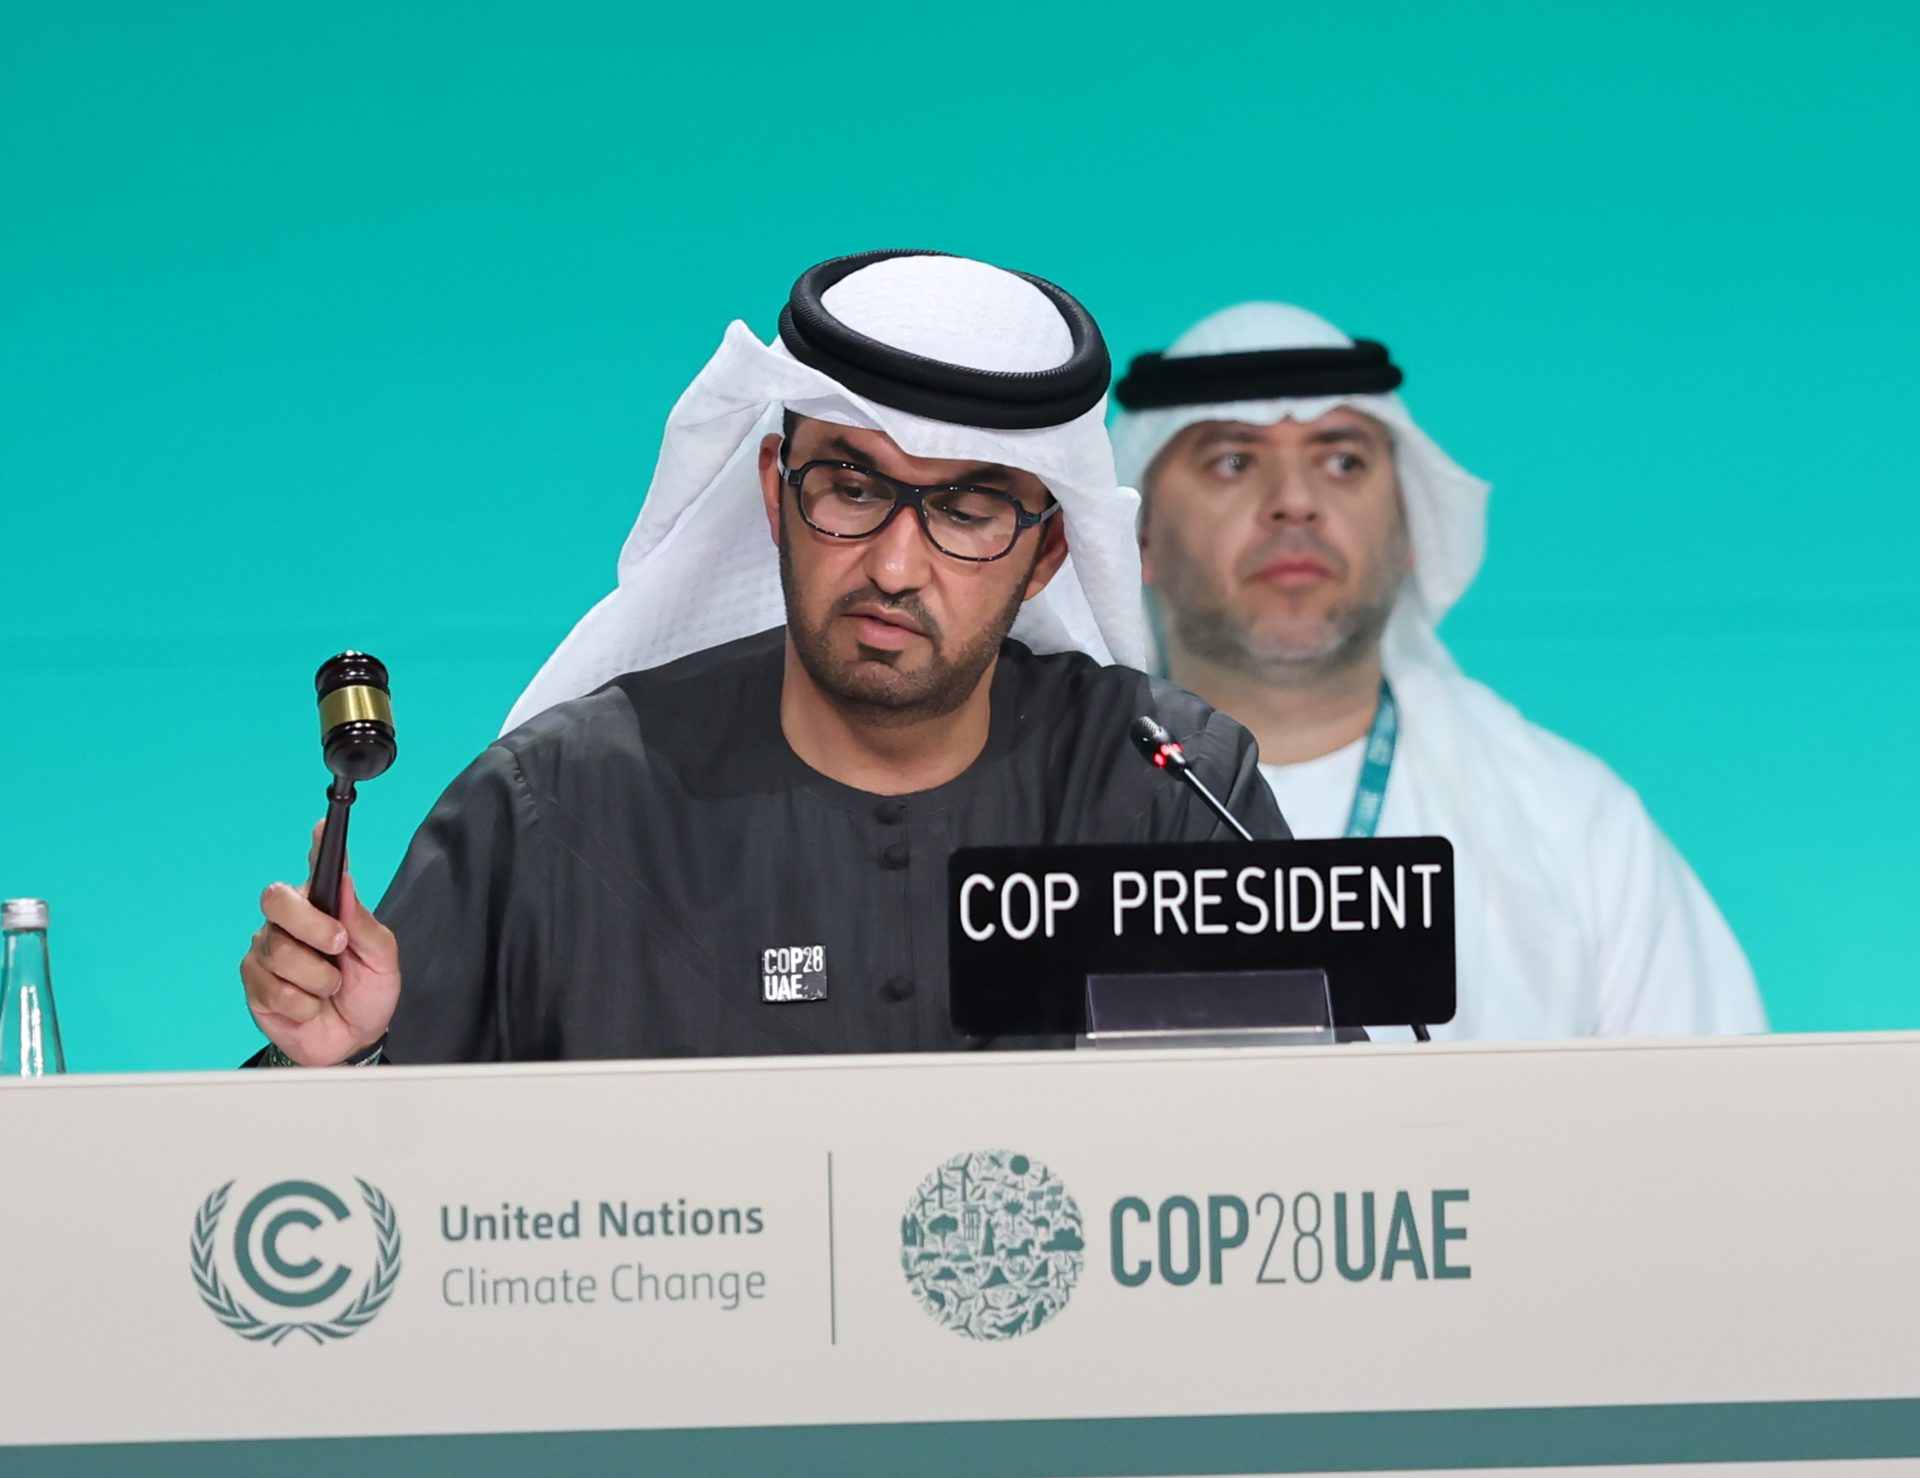 Dubai (United Arab Emirates), 11/12/2023.- President of COP28 and UAE's Minister for Industry and Advanced Technology Dr. Sultan Ahmed Al Jaber attends a session at the COP28 Conference in Dubai, United Arab Emirates, 11 December 2023. The 2023 United Nations Climate Change Conference (COP28), runs from 30 November to 12 December, and is expected to host one of the largest number of participants in the annual global climate conference as over 70,000 estimated attendees, including the member states of the UN Framework Convention on Climate Change (UNFCCC), business leaders, young people, climate scientists, Indigenous Peoples and other relevant stakeholders will attend. (Emiratos Árabes Unidos) EFE/EPA/ALI HAIDER EPA-EFE/ALI HAIDER